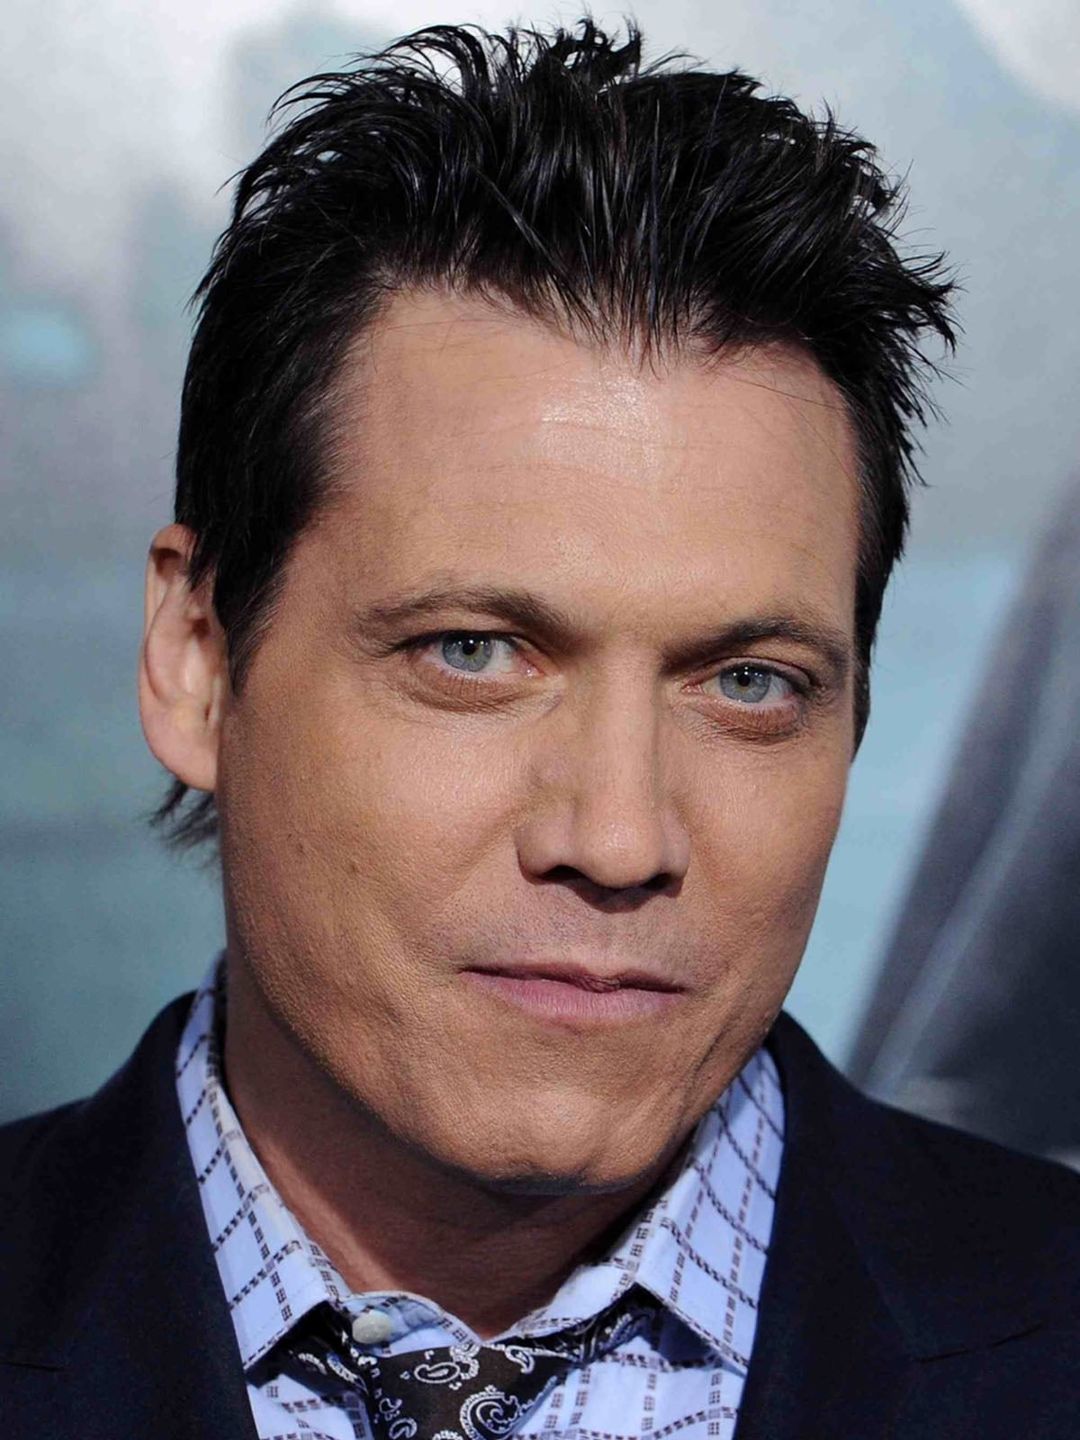 Holt McCallany dating history